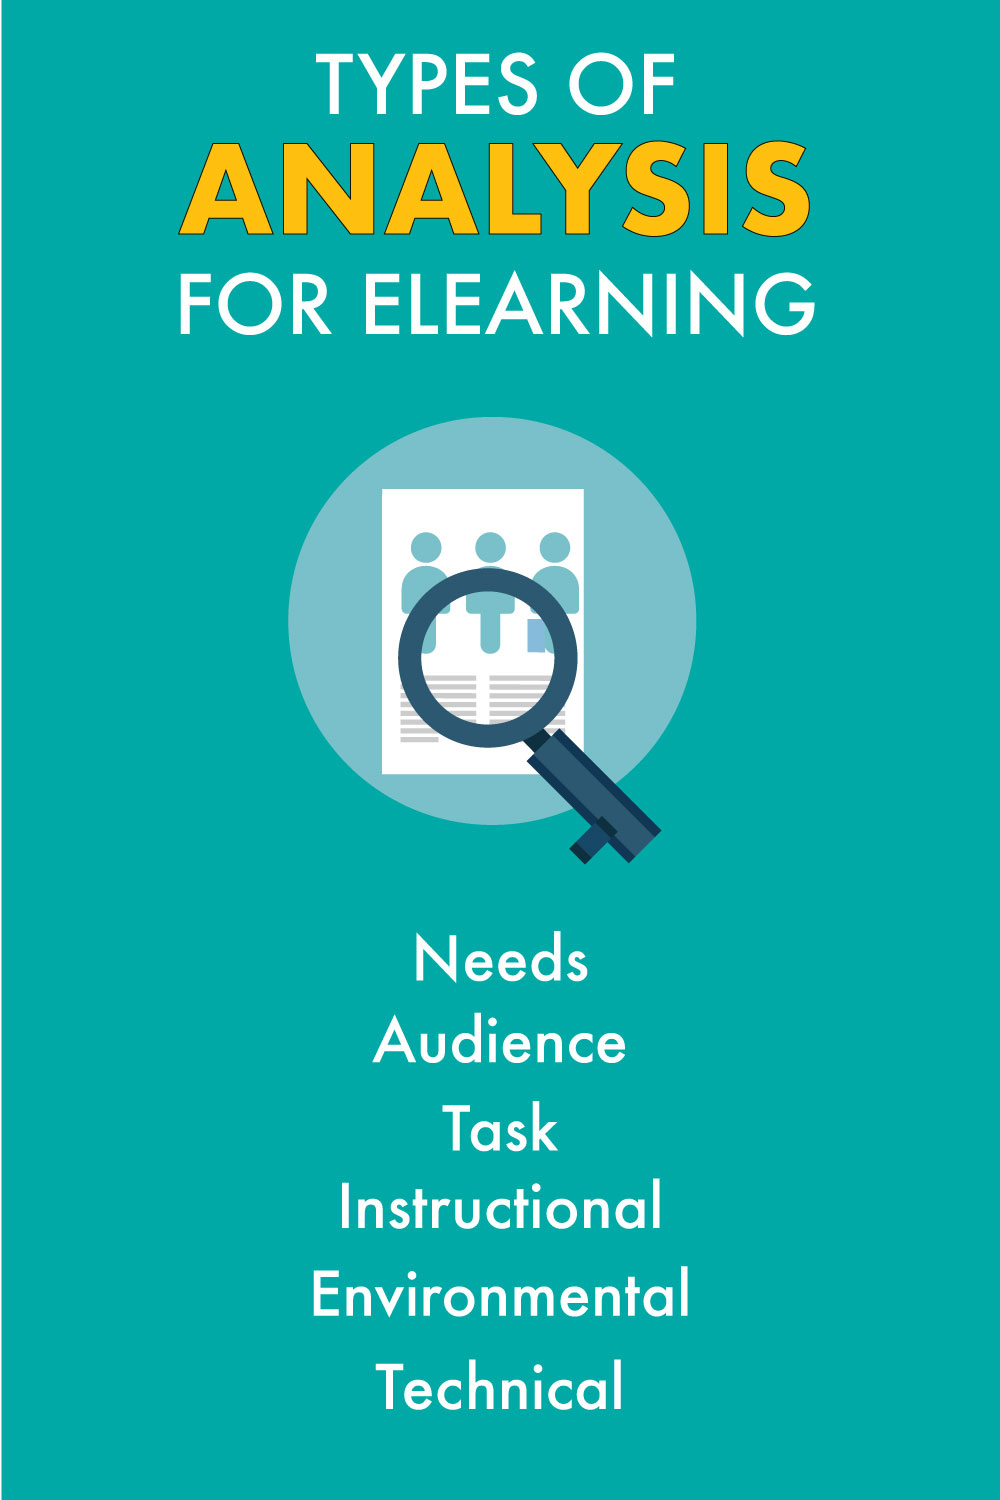 Types of Analysis for eLearning